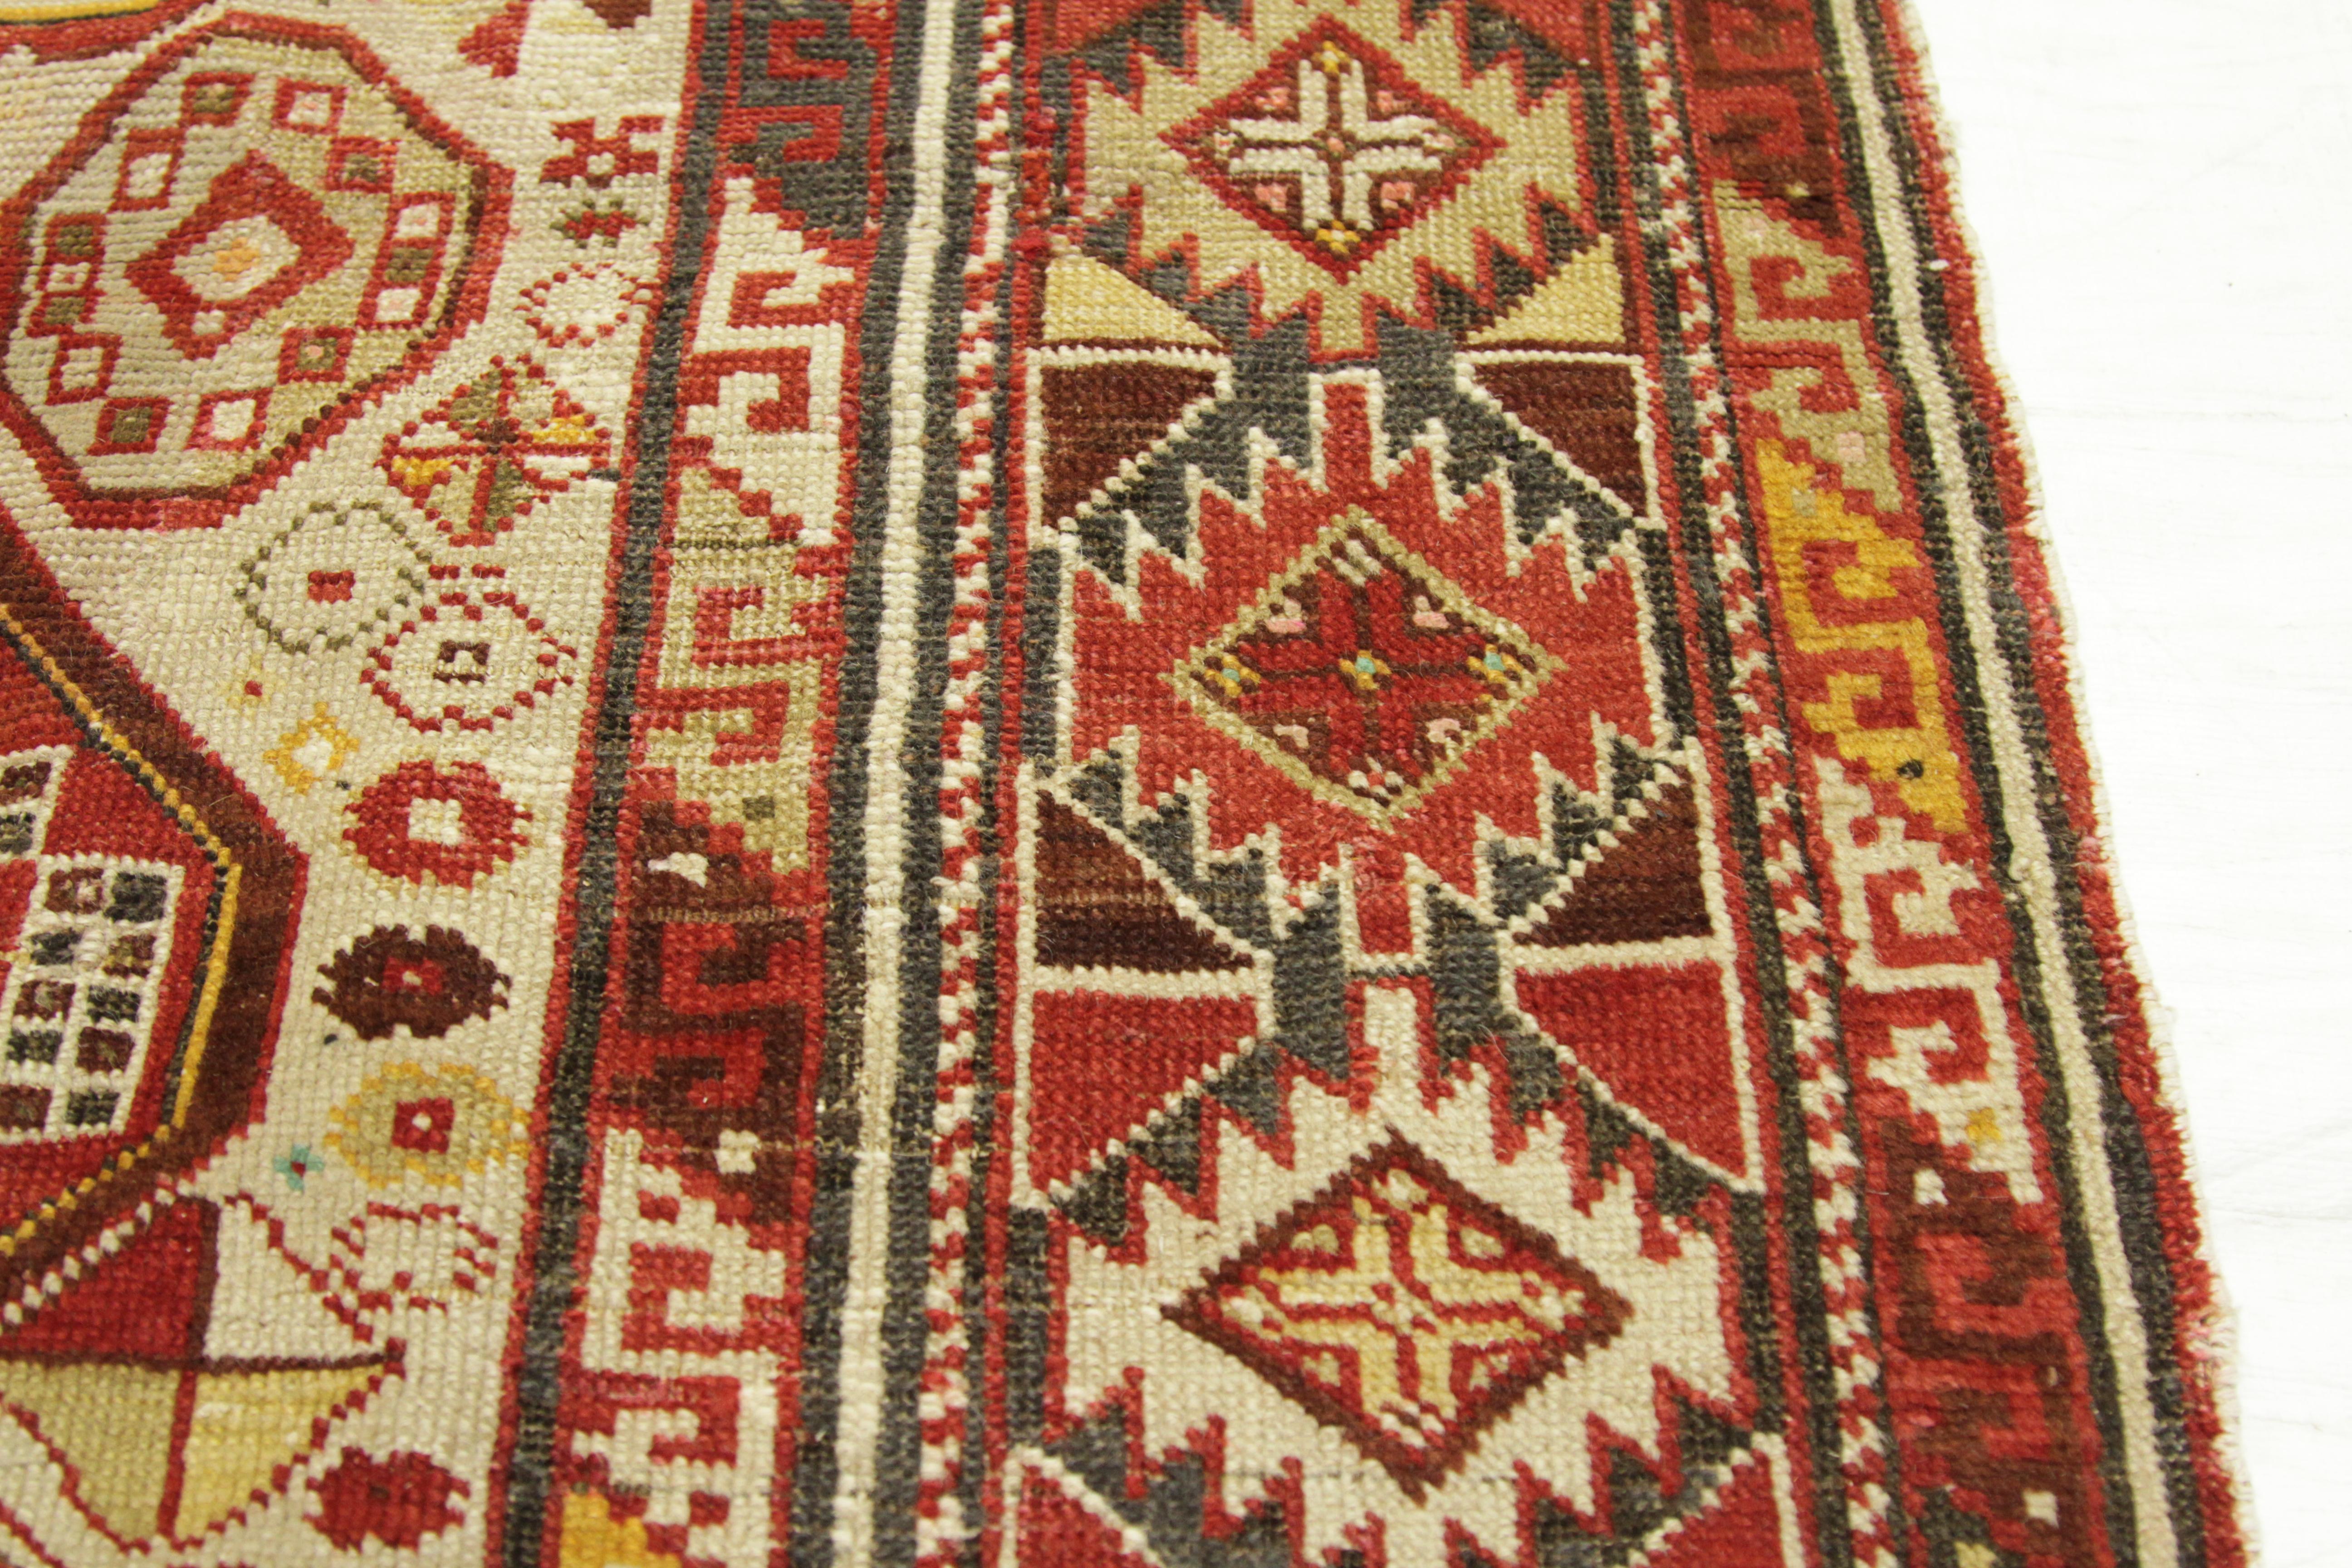 Antique Russian Rug Shirvan Style with Intricate Geometric Patterns, circa 1900s For Sale 2